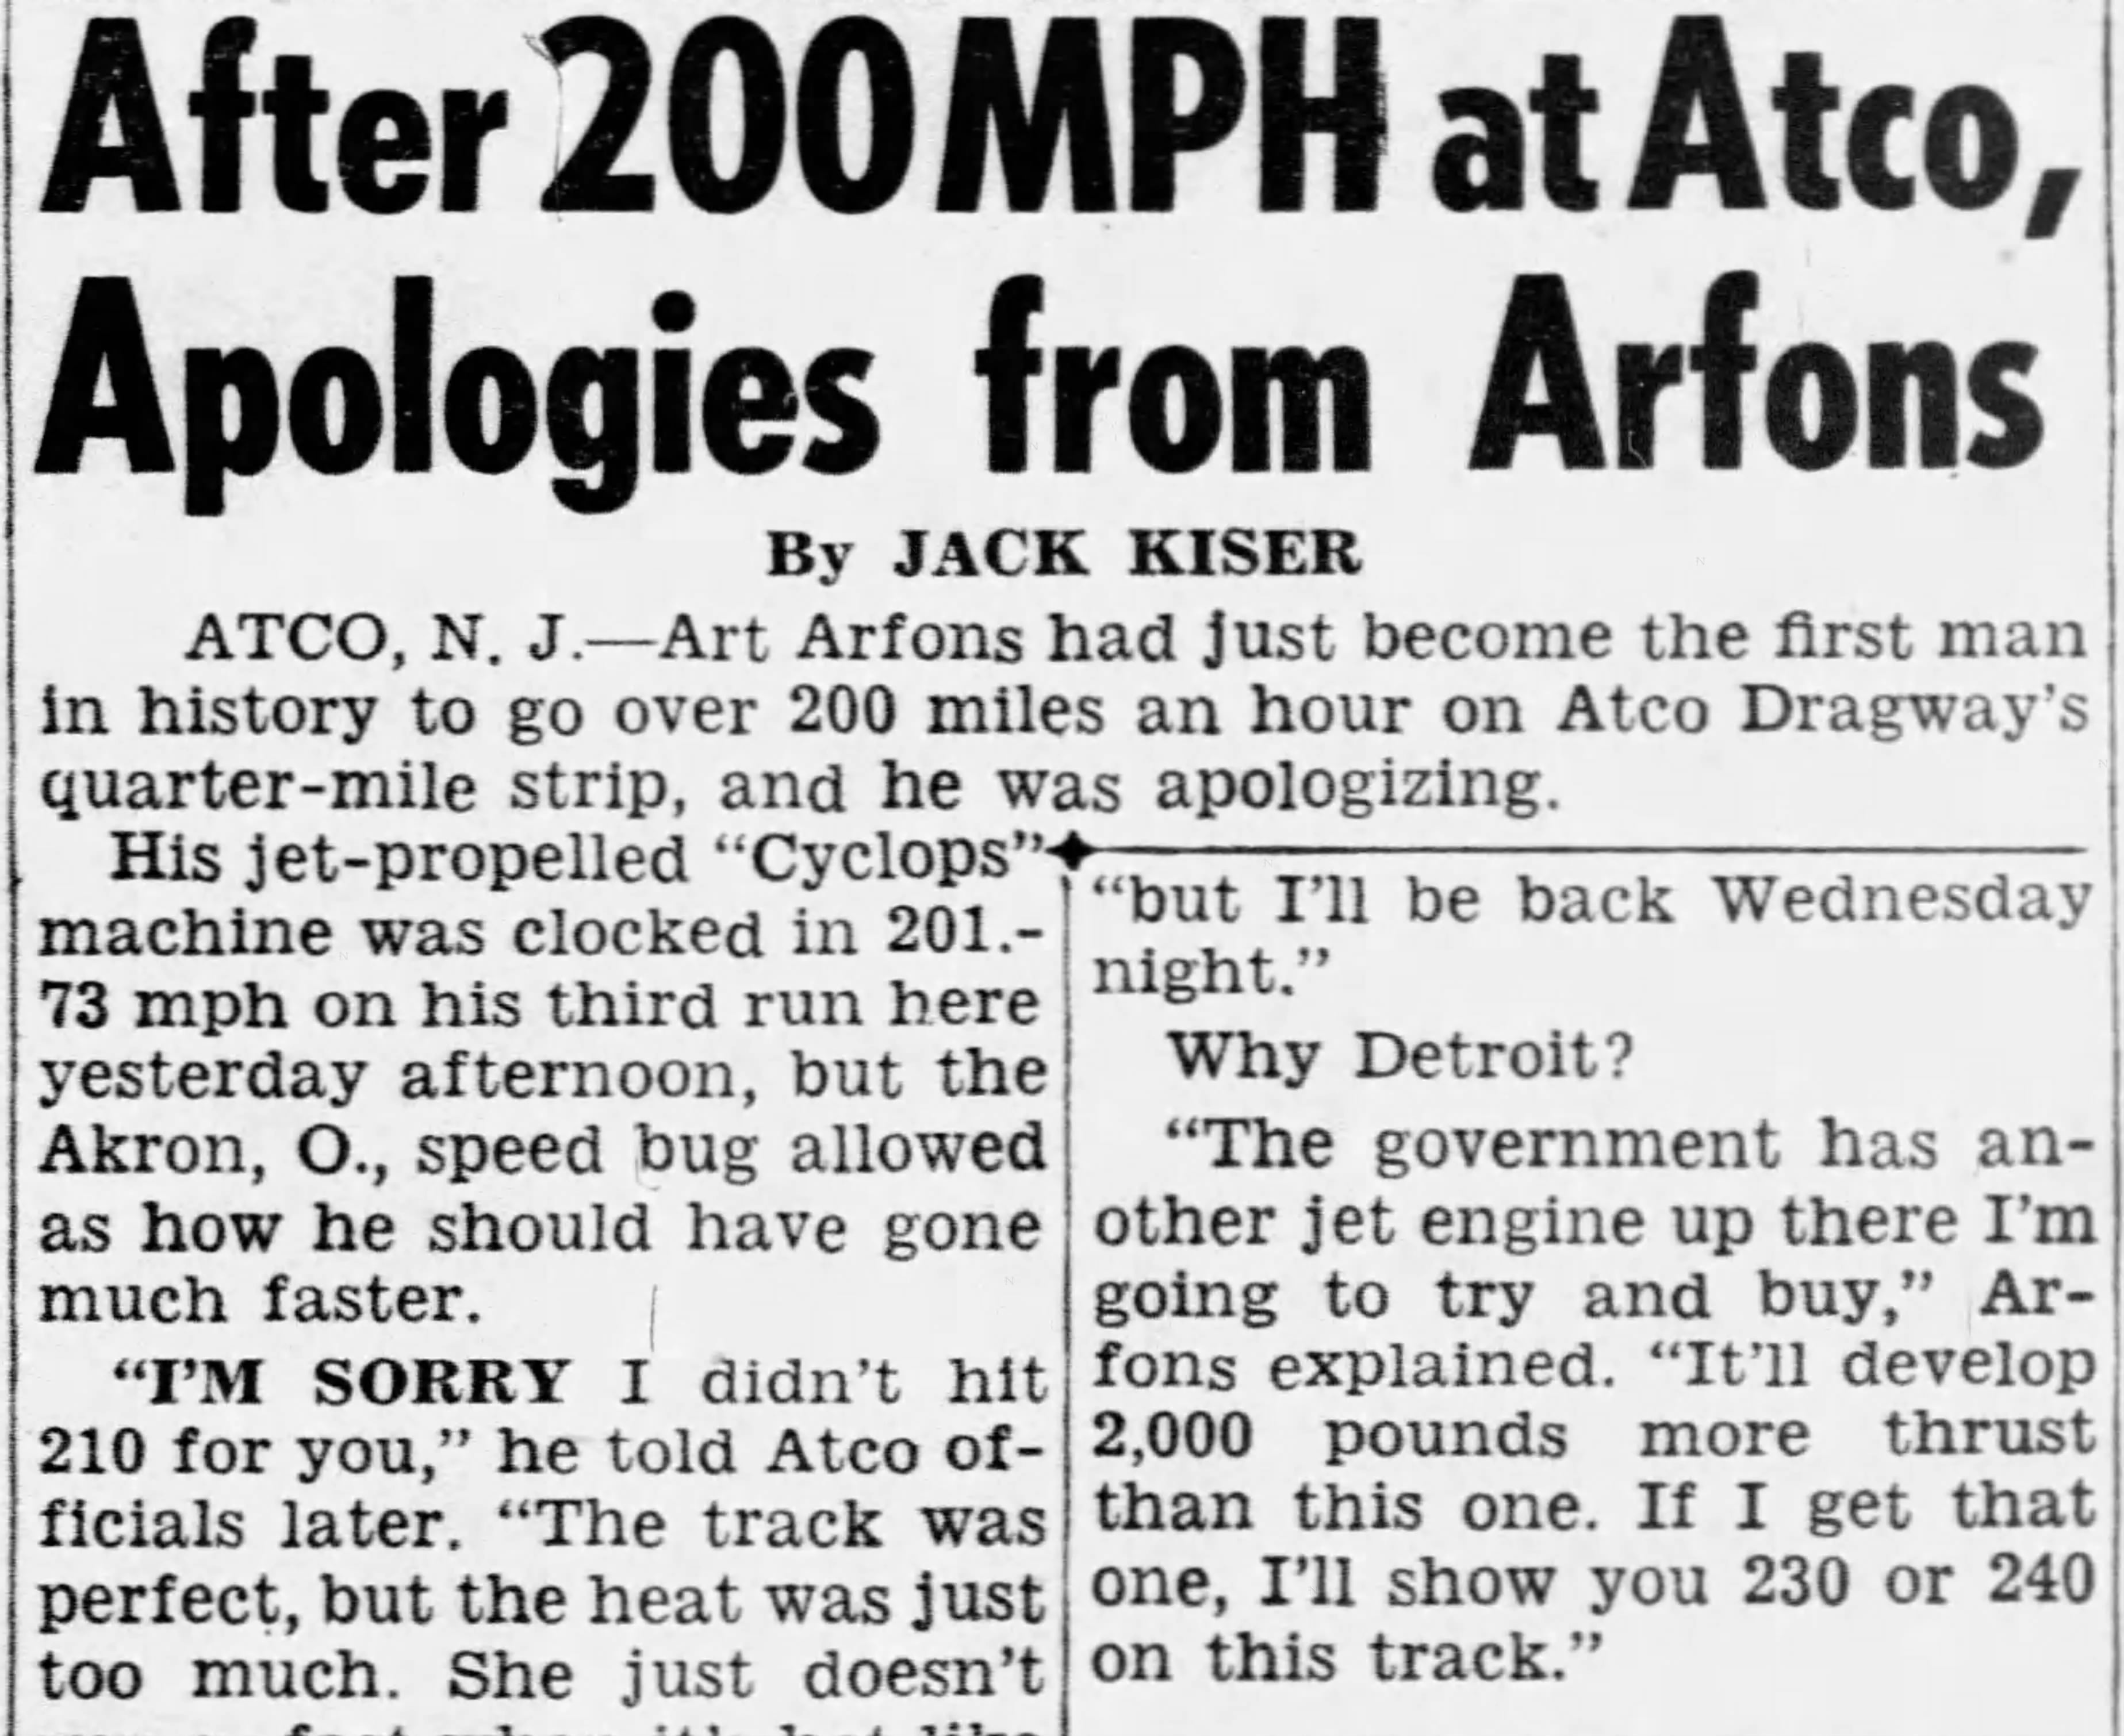 A May 21, 1962, edition of the Daily News details Art Arfons' 200-mph run at Atco Dragway.